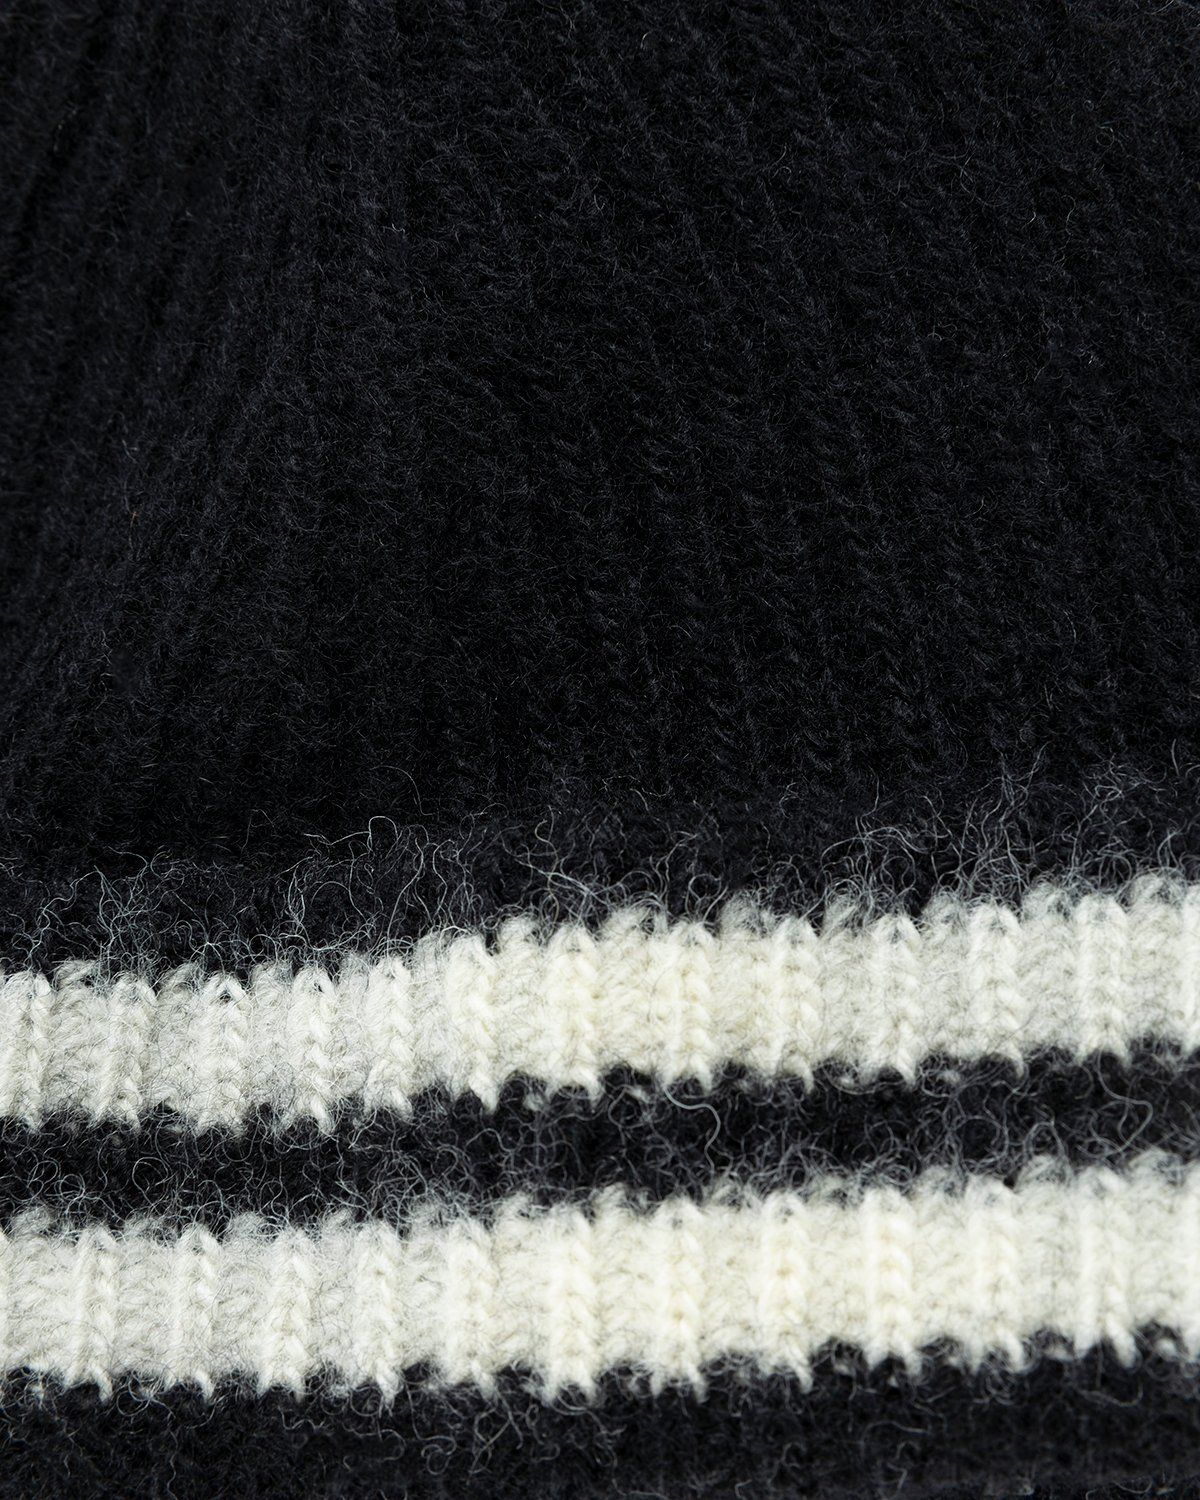 Our Legacy – Knitted Stripe Hat Black Ivory Wool - Hats - Black - Image 4